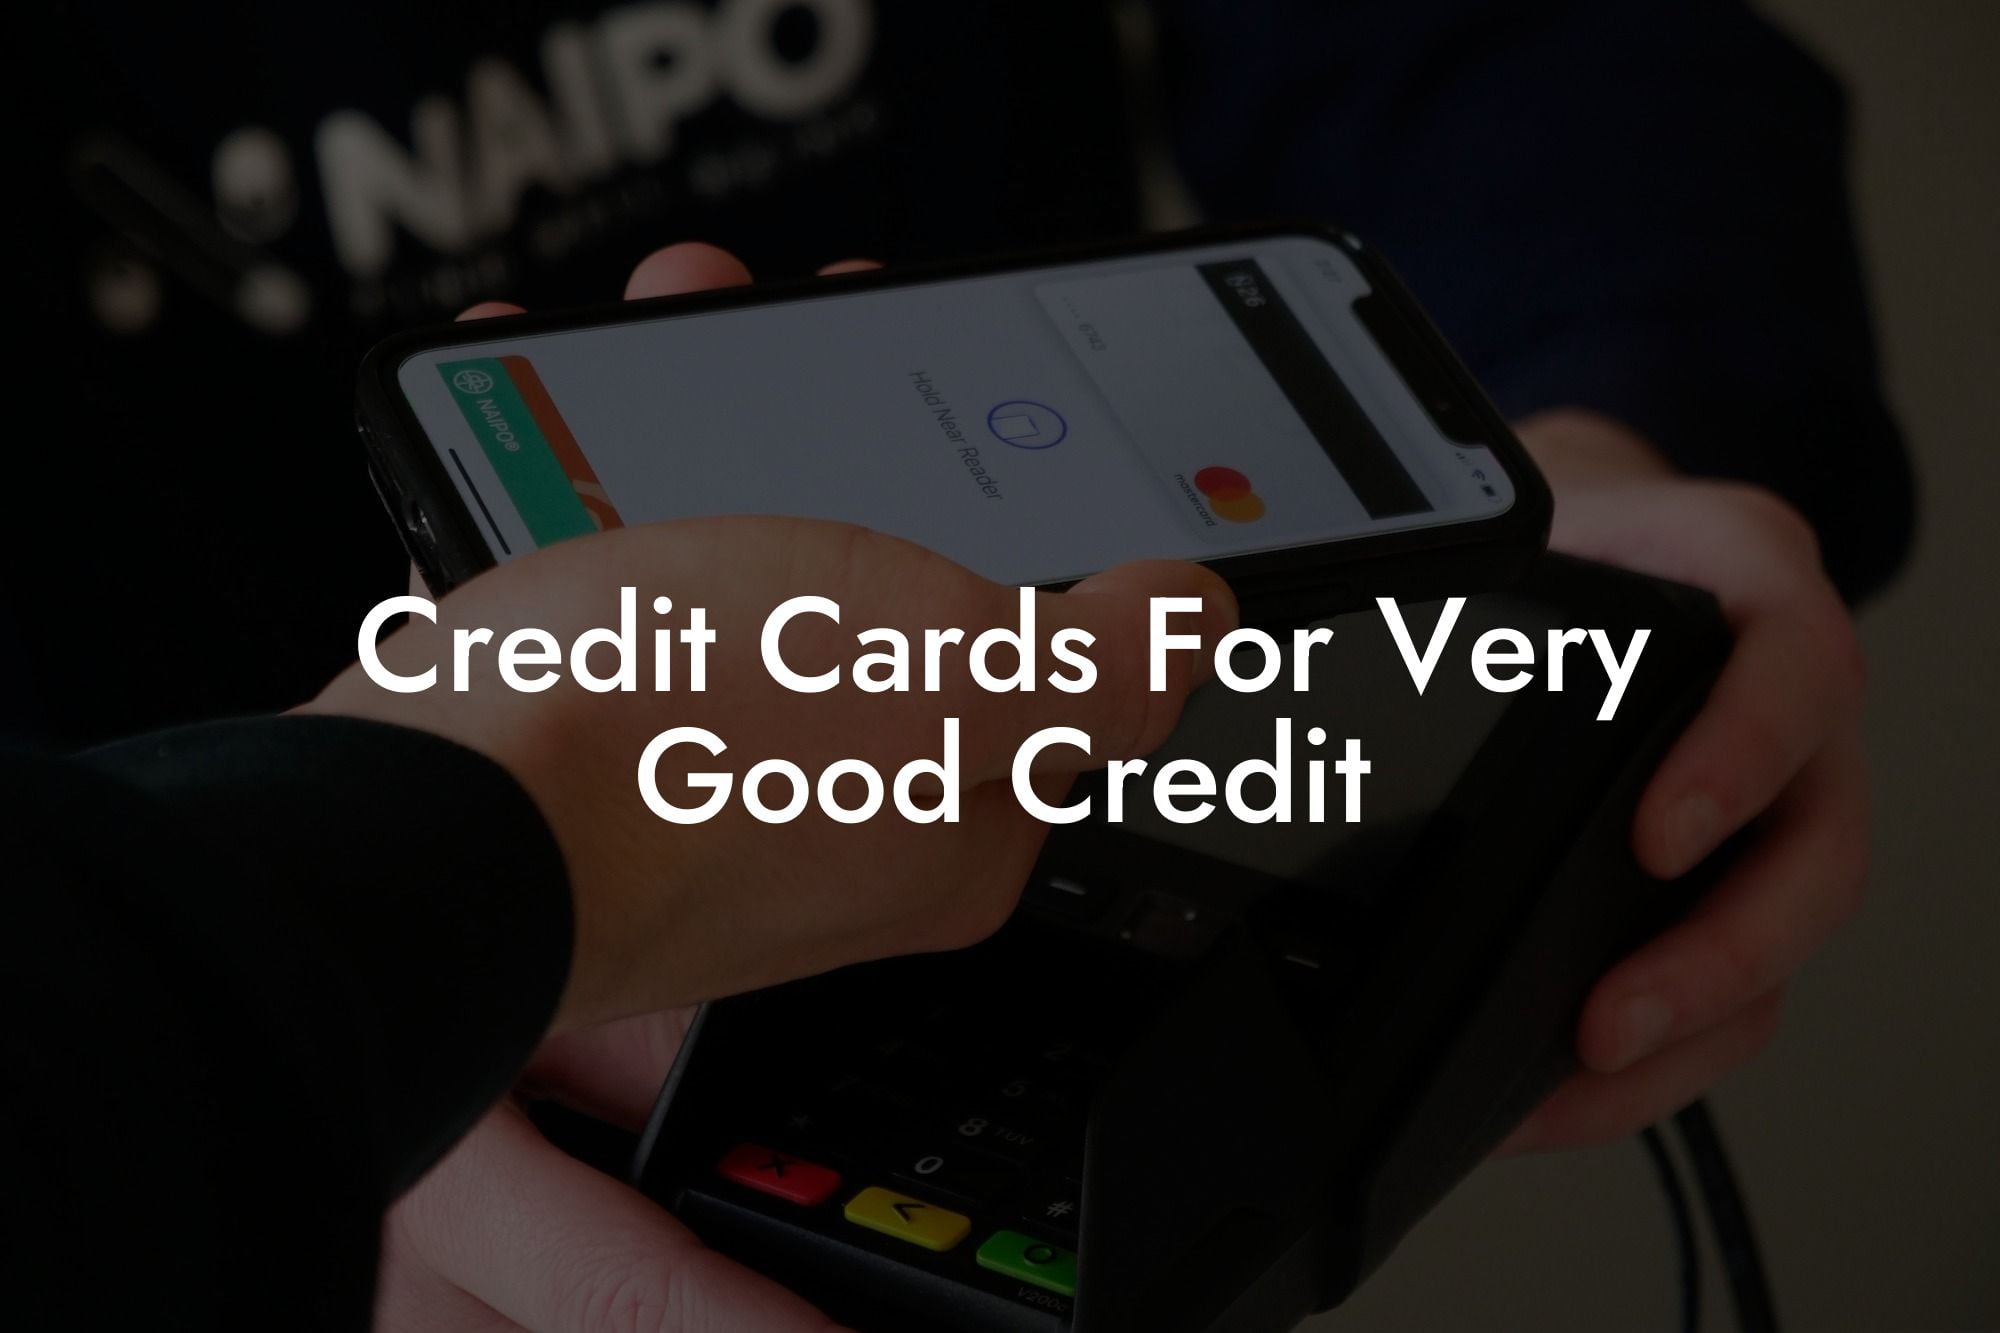 Credit Cards For Very Good Credit